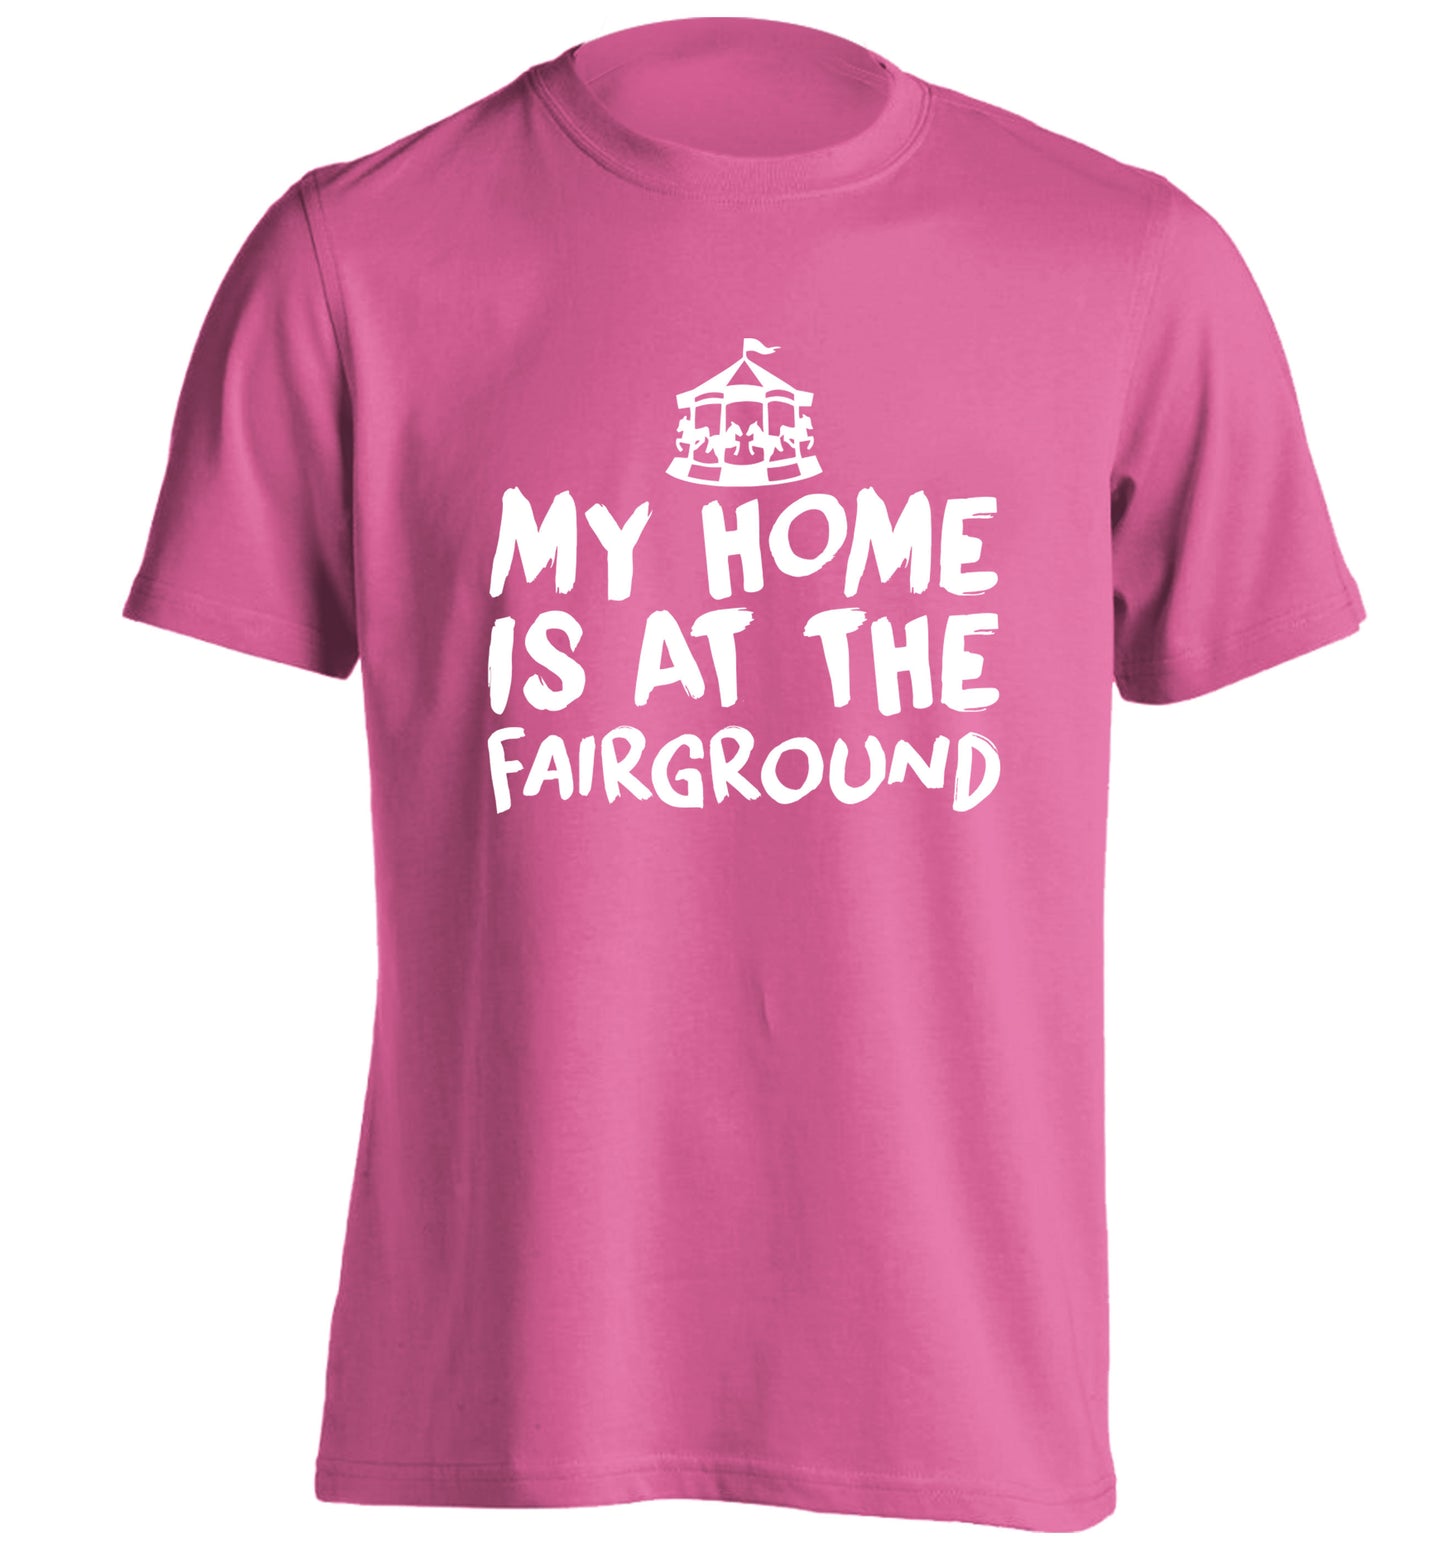 My home is at the fairground adults unisex pink Tshirt 2XL